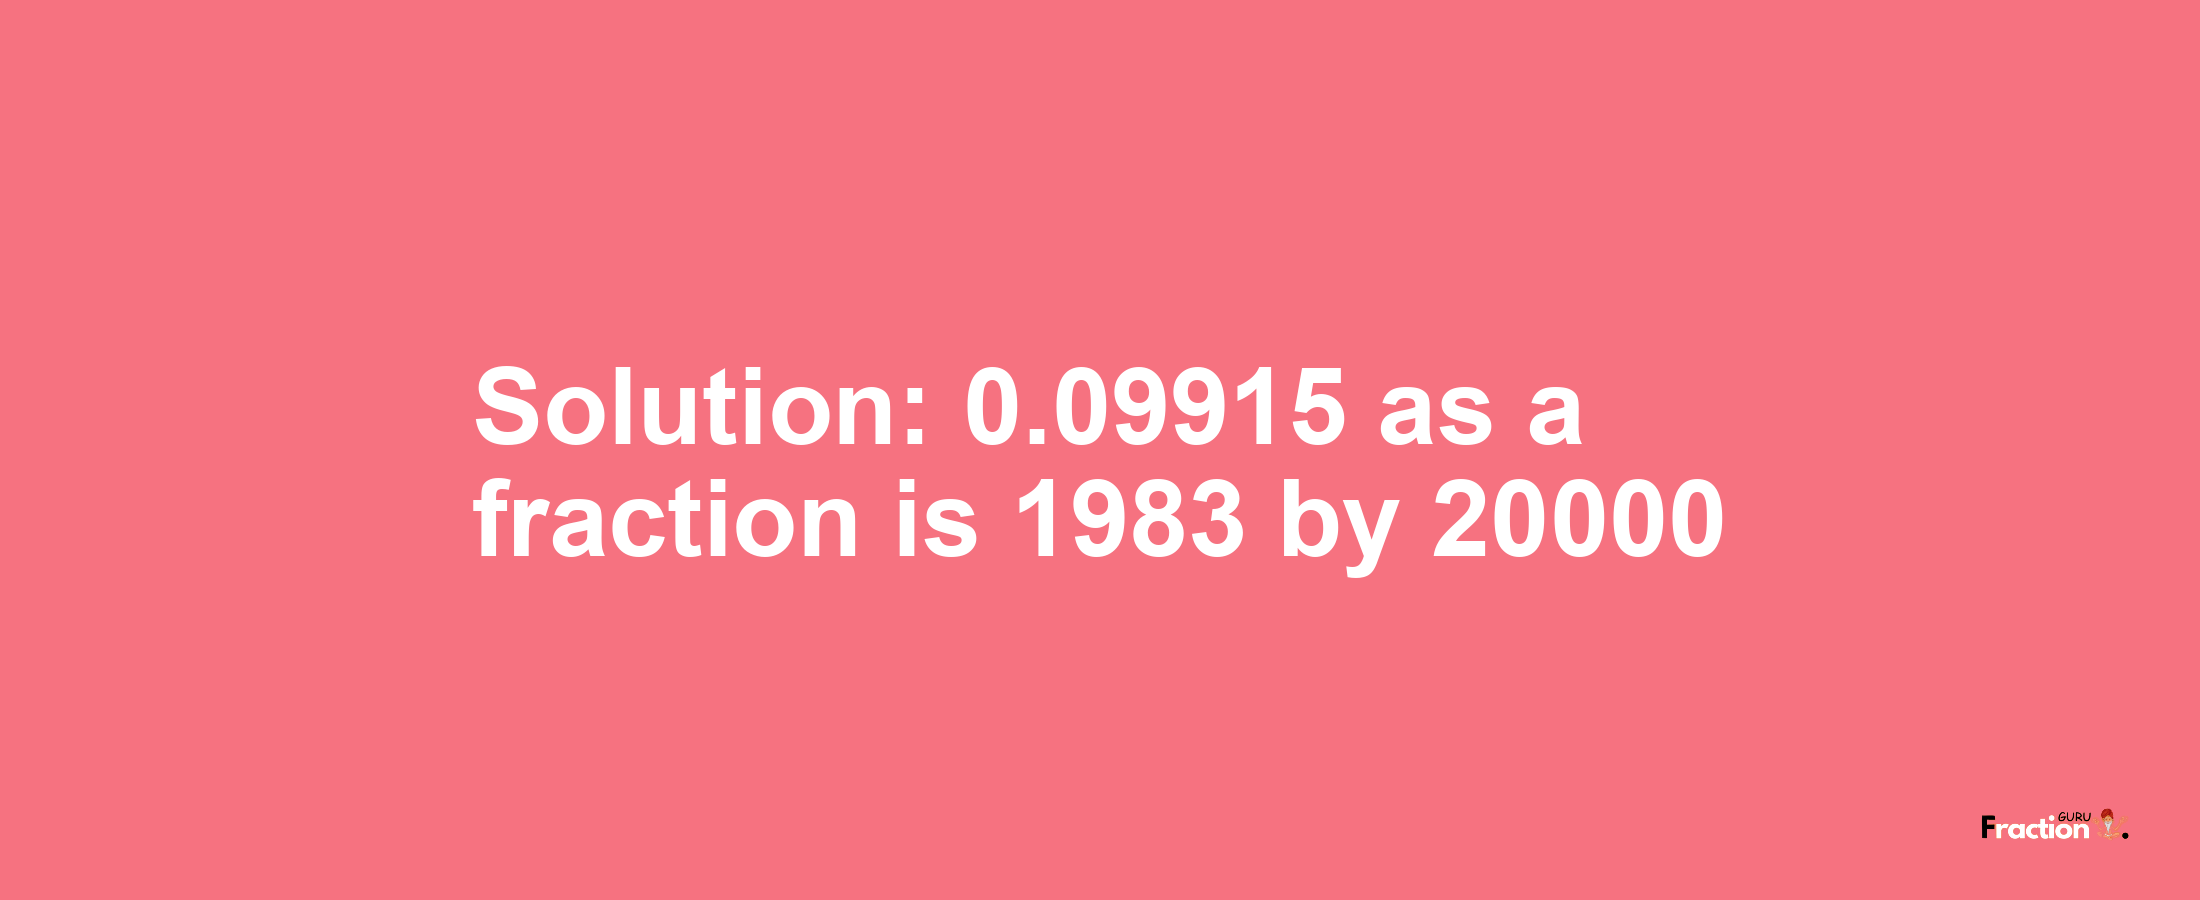 Solution:0.09915 as a fraction is 1983/20000